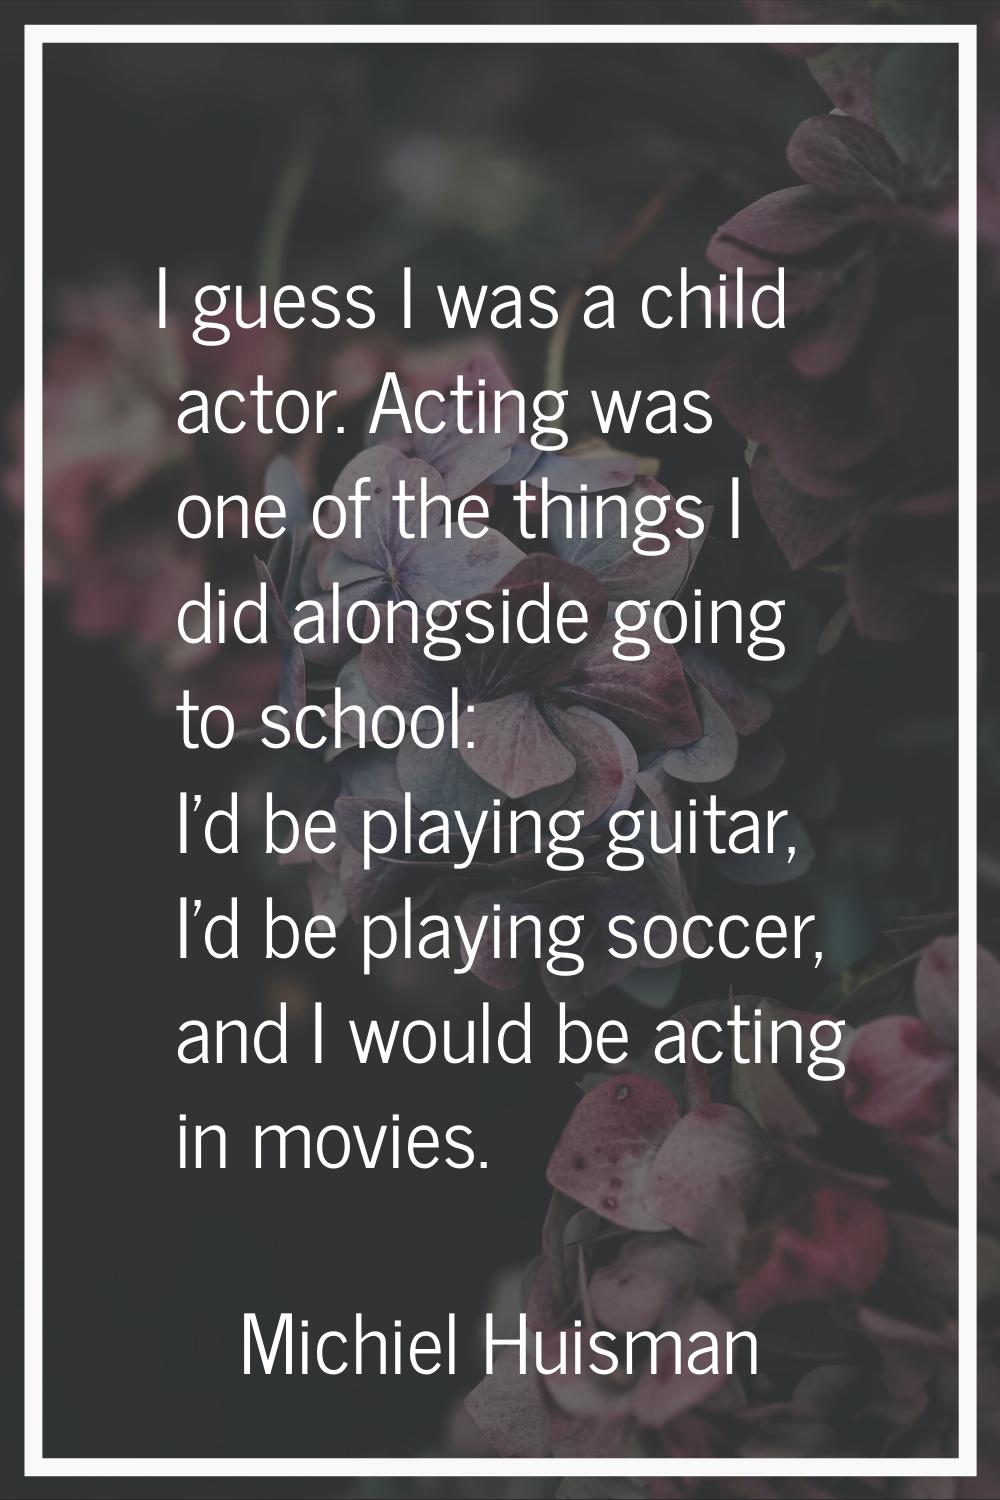 I guess I was a child actor. Acting was one of the things I did alongside going to school: I'd be p